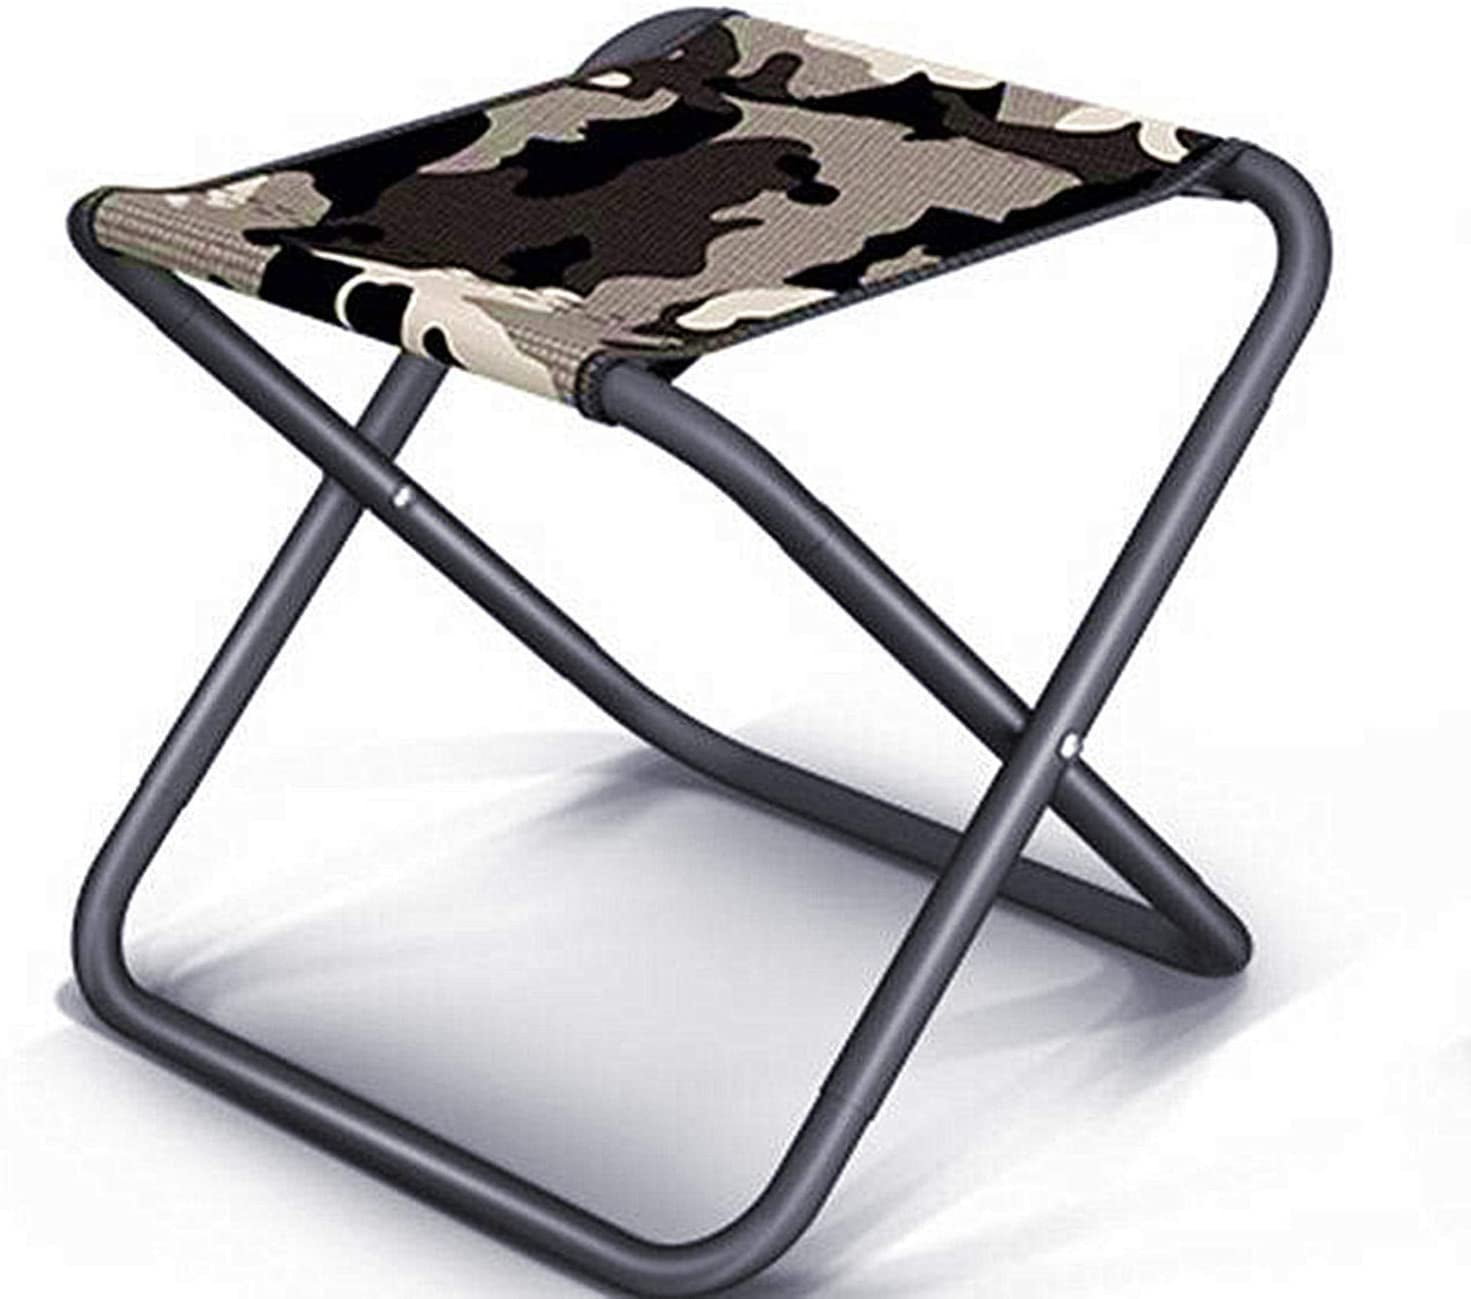 Camping Chairs Folding Lightweight Camp Stool Folding Mini Chair Outdoor Hiking 